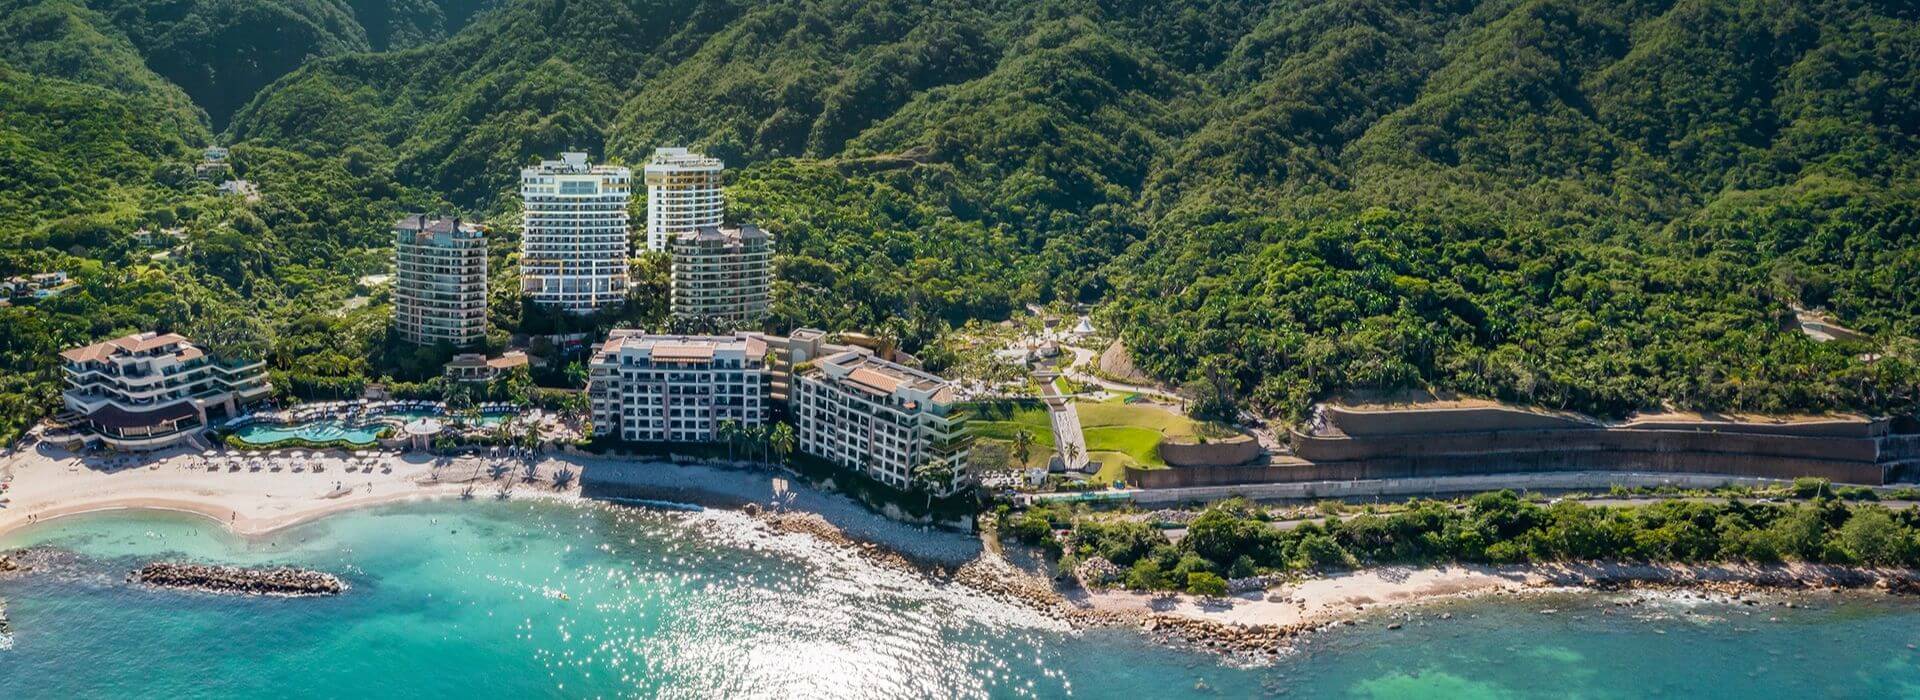 An aerial view of a lush mountainside on the ocean with several high rise hotel buildings built on the side of the mountain and on the beach front., along with a pool, a sandy beach, and the turquoise waters of Banderas Bay.